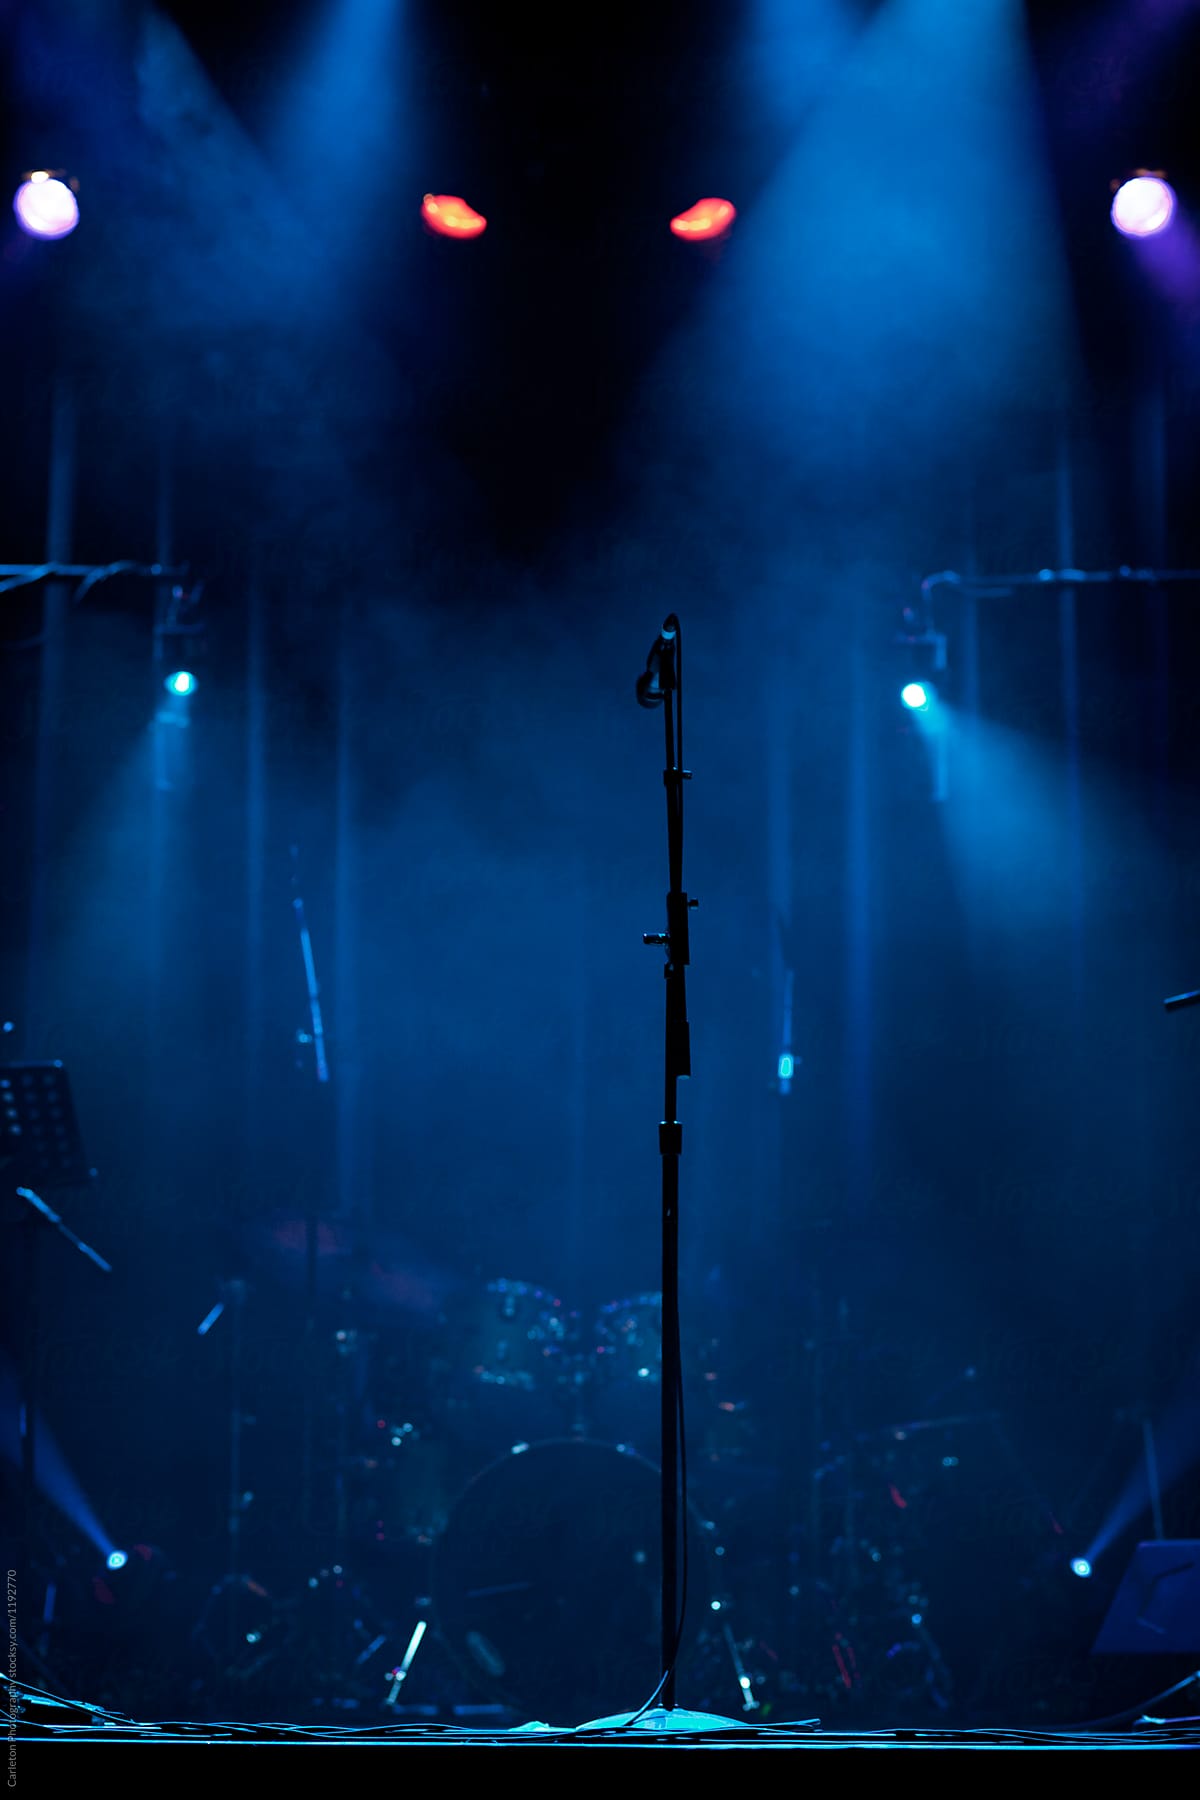 Microphone on stage with creepy lights behind